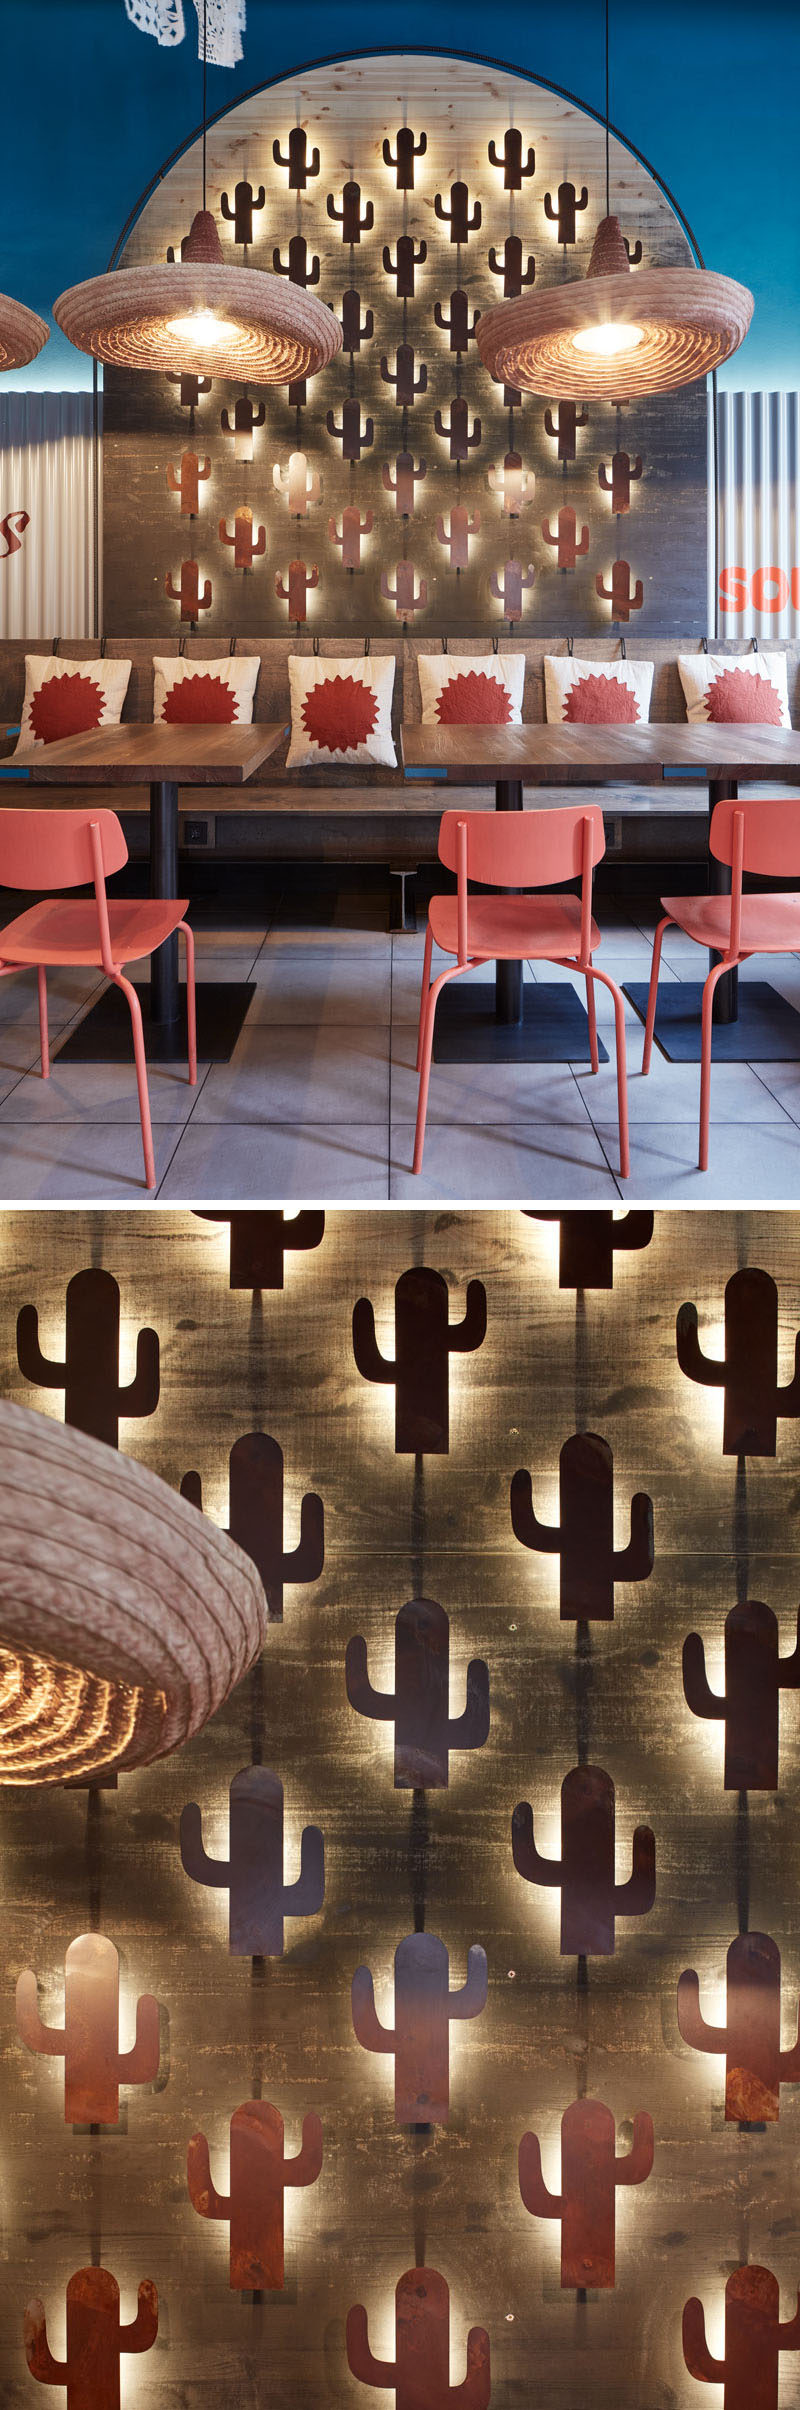 This modern Mexican restaurant features cacti motifs throughtout, like mini cacti on the wall that are backlit. #RestaurantDesign #InteriorDesign #Cacti